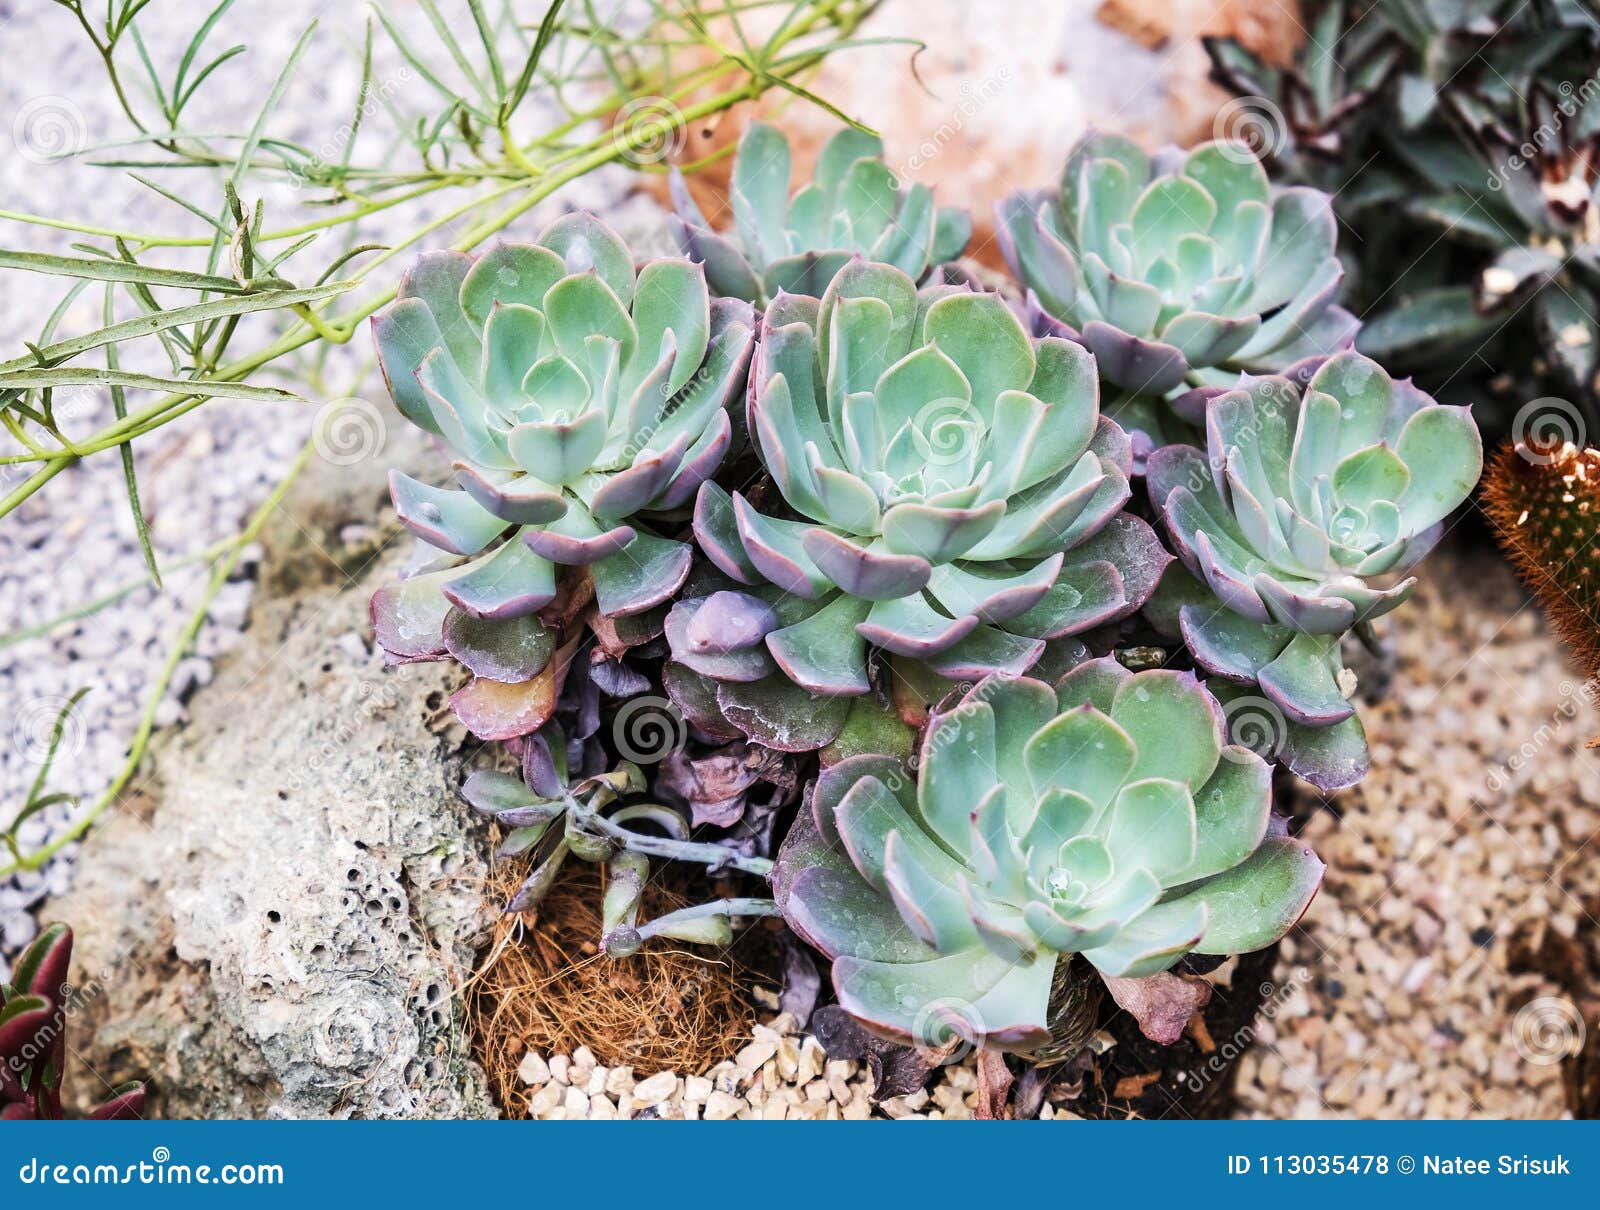 Succulent plant in the garden for design work